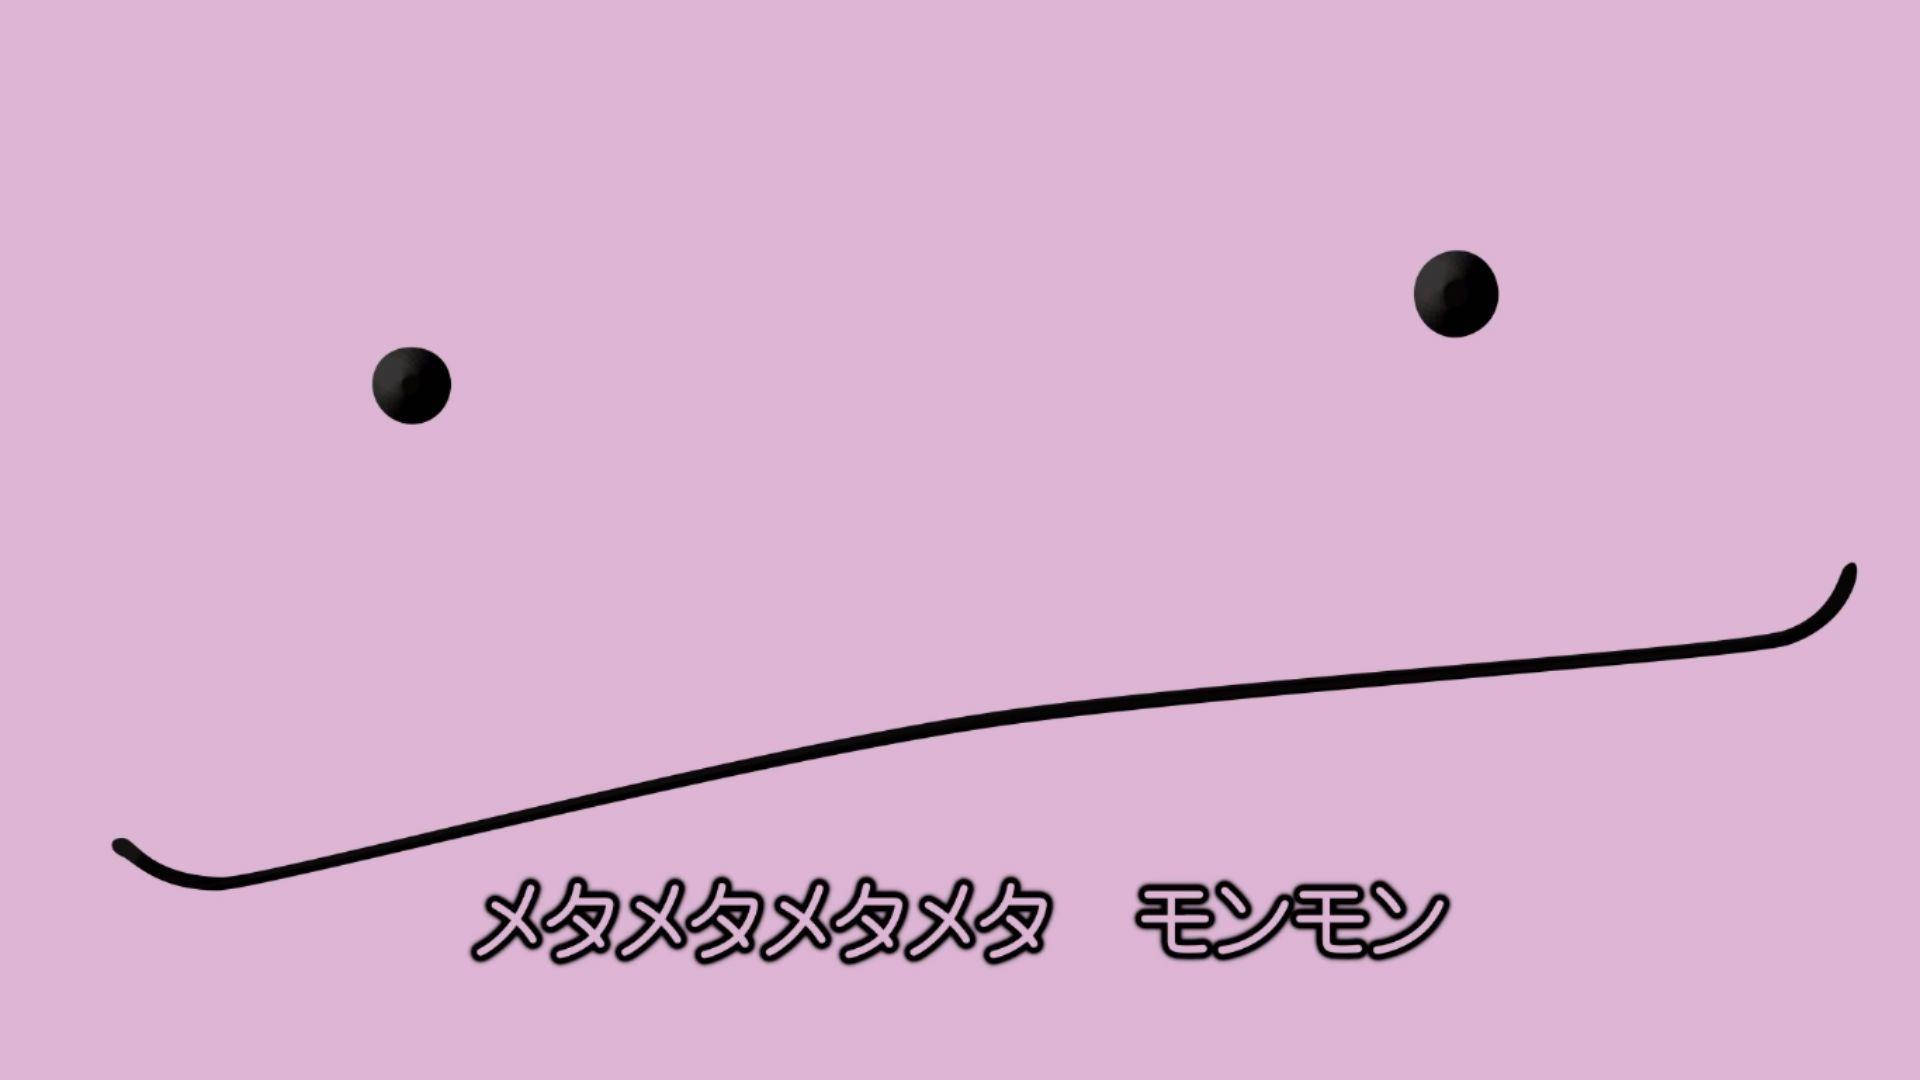 Ditto With Japanese Subtitles Background